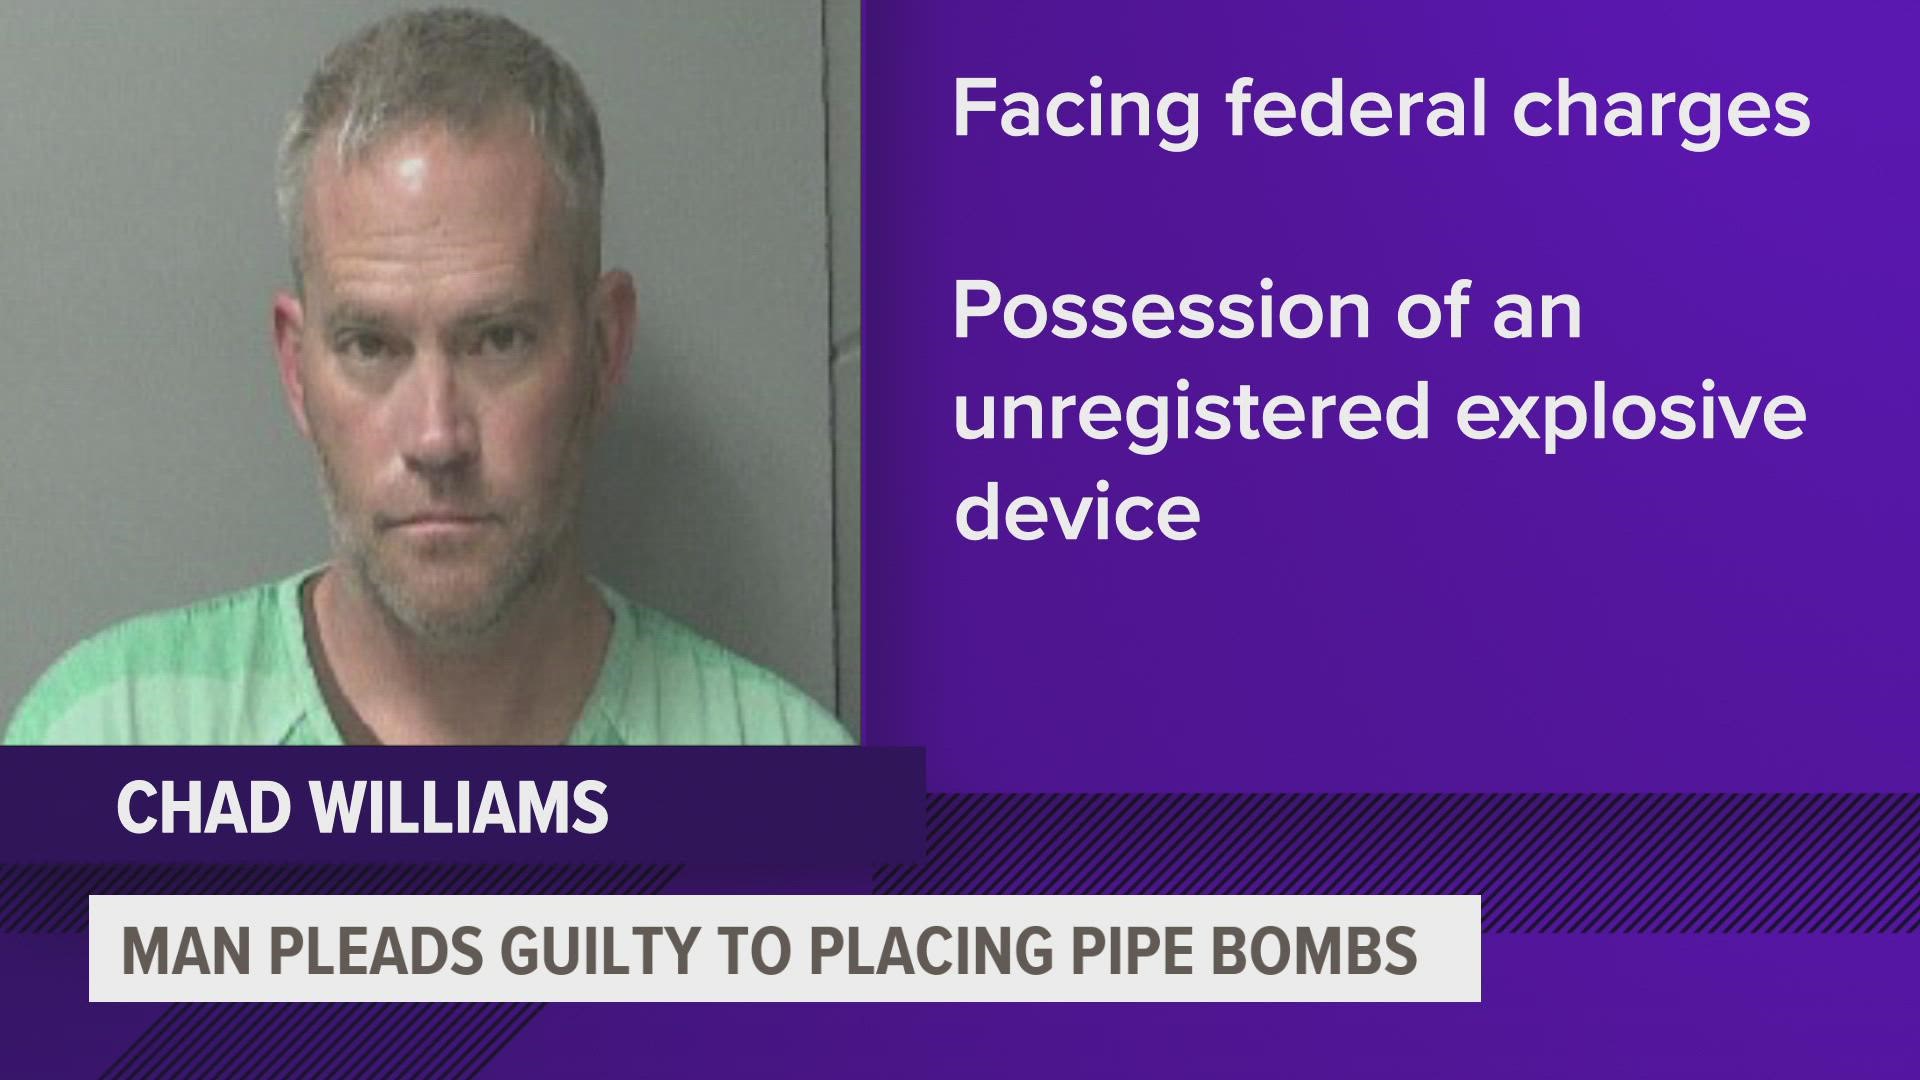 Chad Allen Williams was arrested in June after several explosive devices were found in Ankeny.